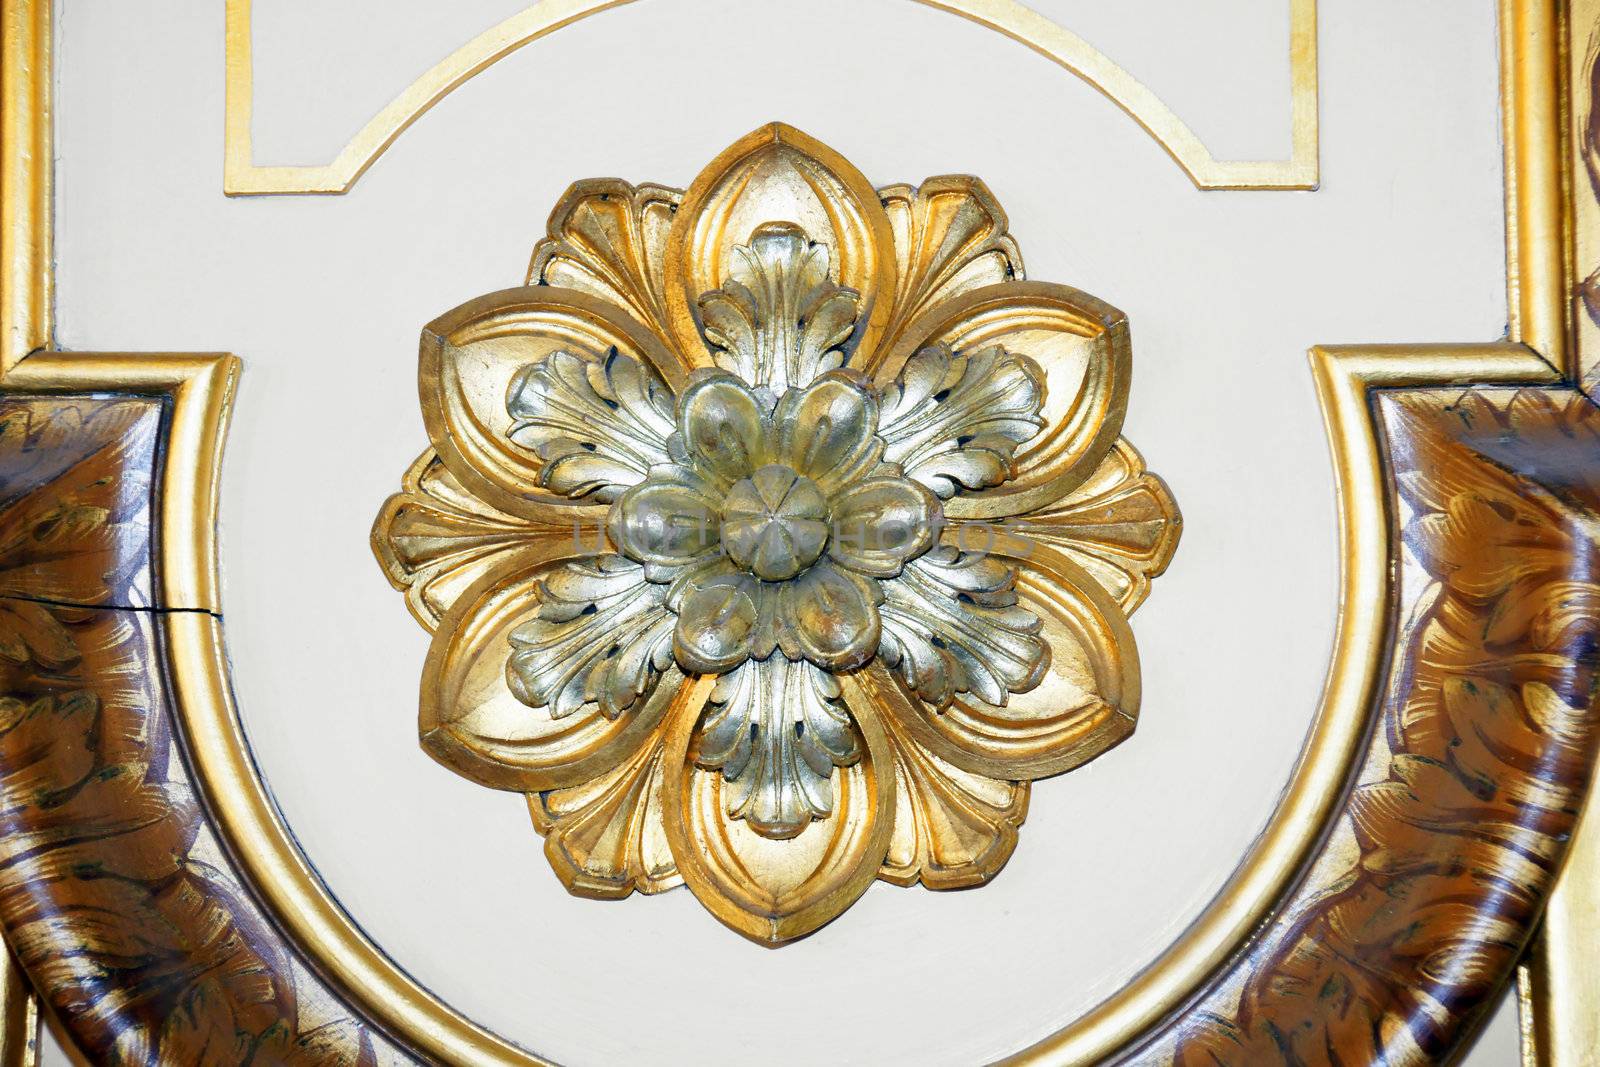 Great vintage rosette detail on the door of an historical european building.